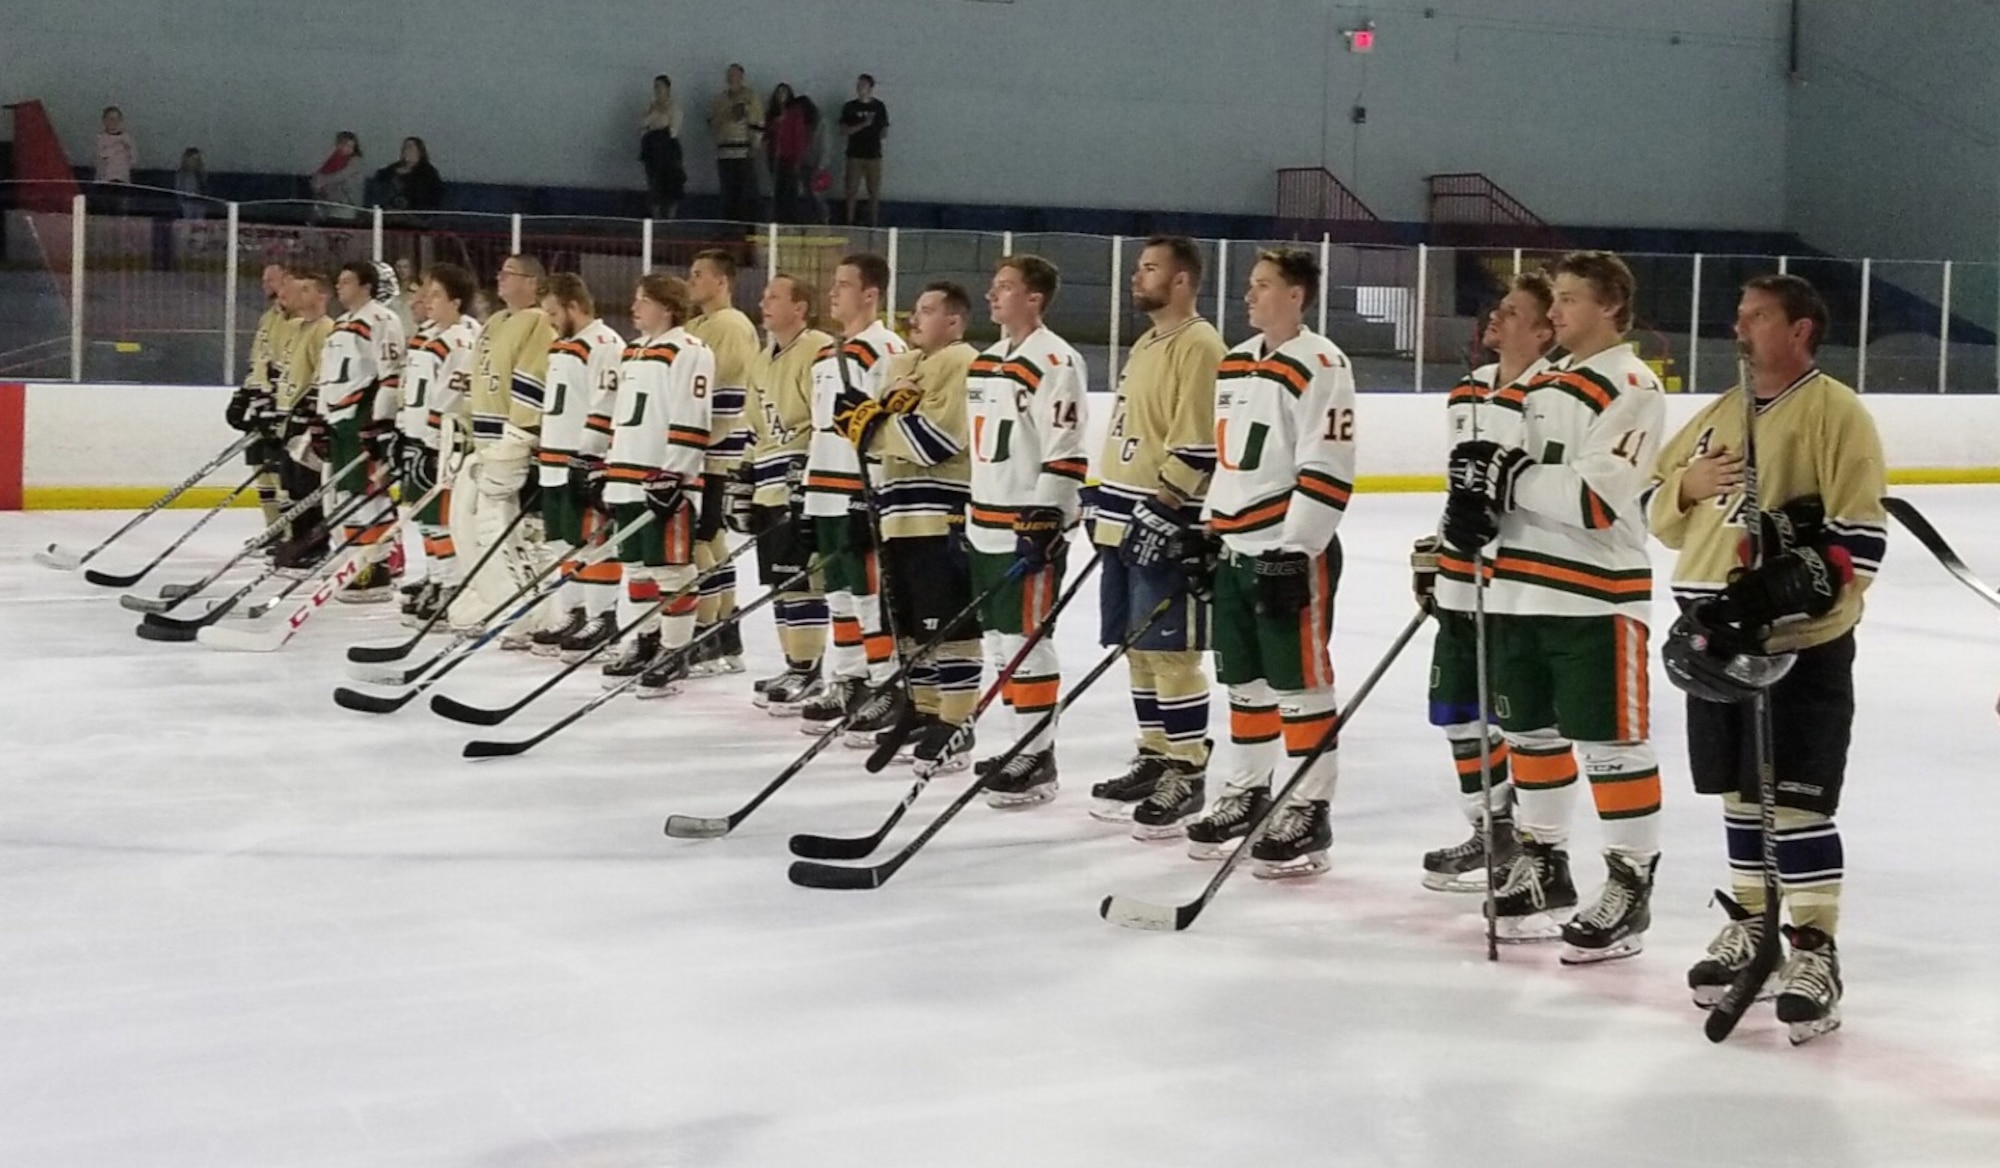 Members of the Miami Hurricanes hockey team stand in unity with the Air Force Technical Applications Center hockey club during the National Anthem Feb. 23, 2019 at an exhibition game at Pembroke Pines Ice Arena, Miami’s home rink.  AFTAC went on to defeat the 'Canes 12-8.  (Courtesy Photo)